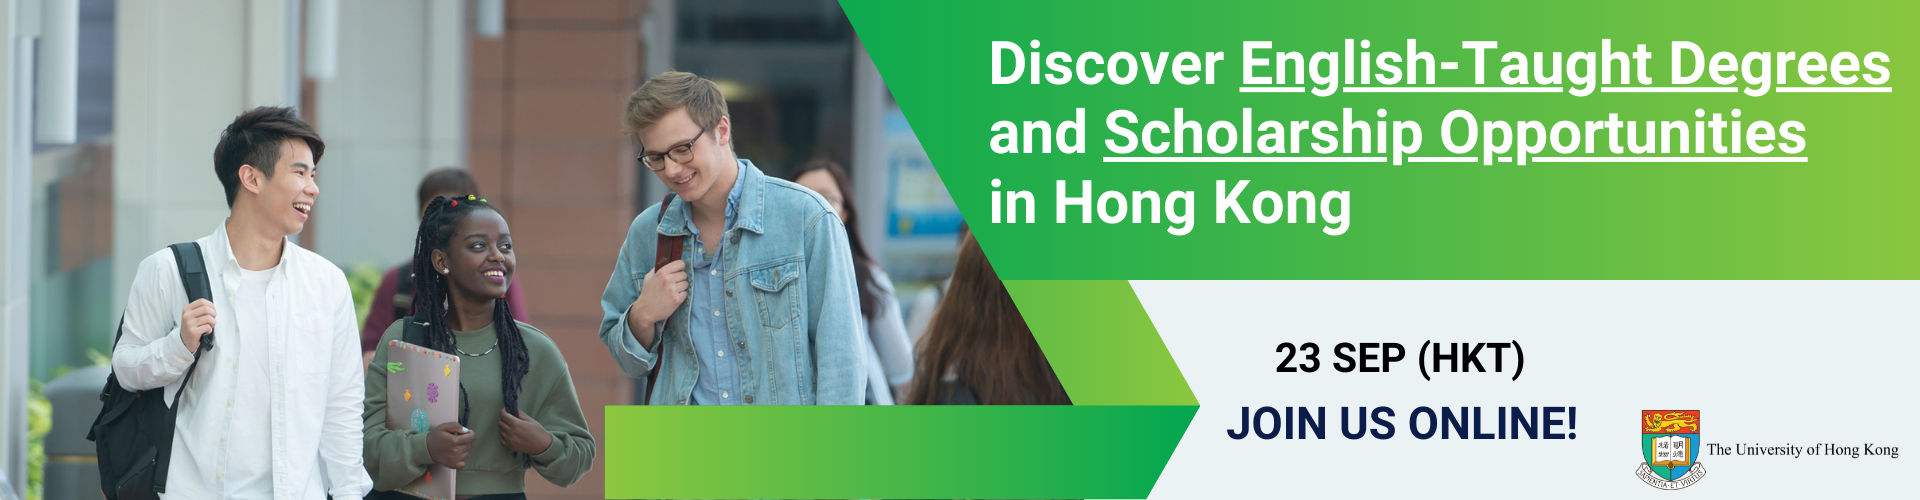 Animated text "Discover English-Taught Degrees and Scholarship Opportunities in Hong Kong 22 Sep Join us online" with photos of students walking on campus